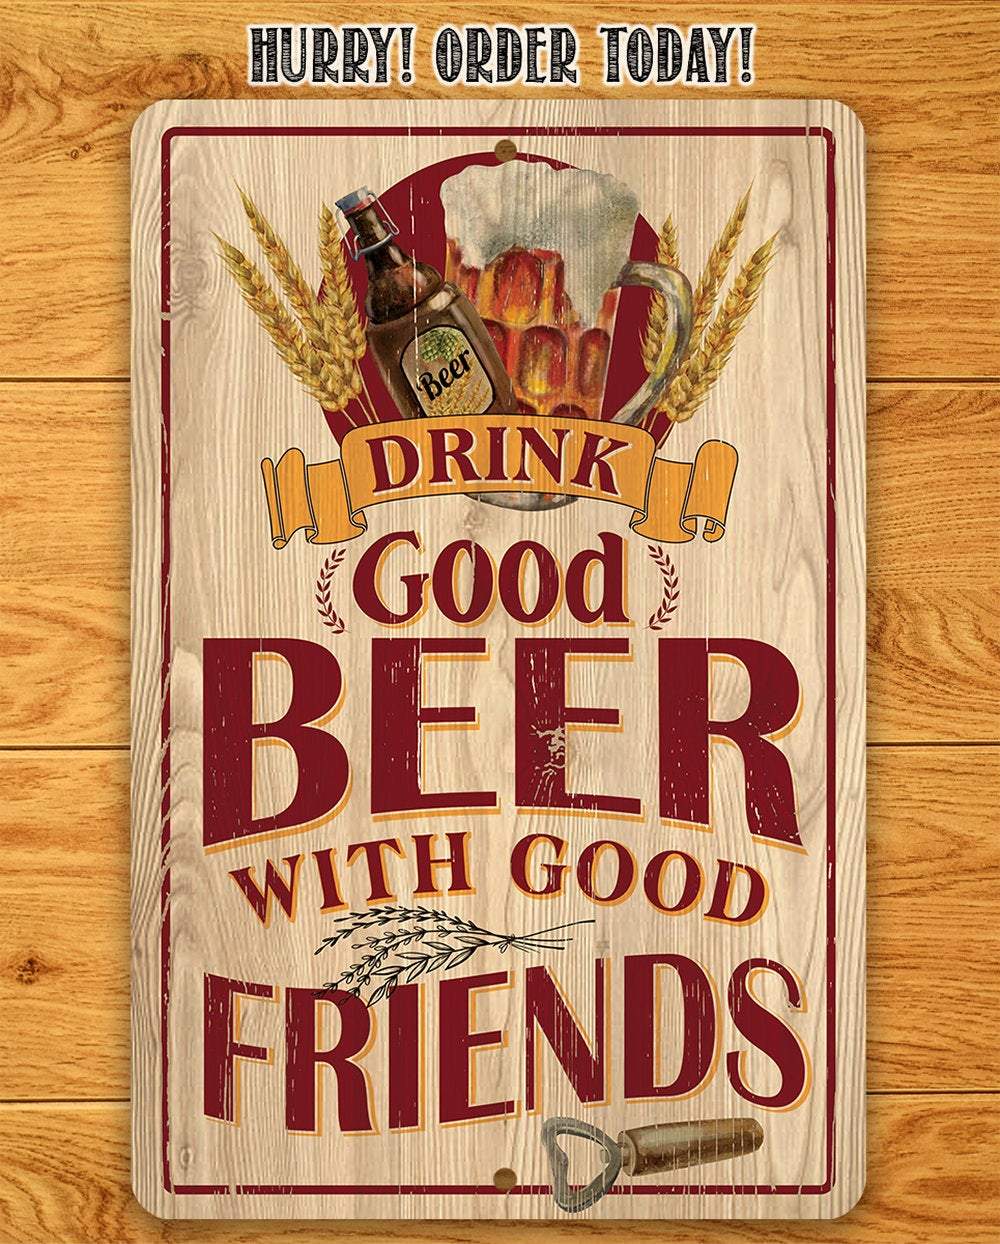 Drink Good Beer with Good Friends - Metal Sign | Lone Star Art.